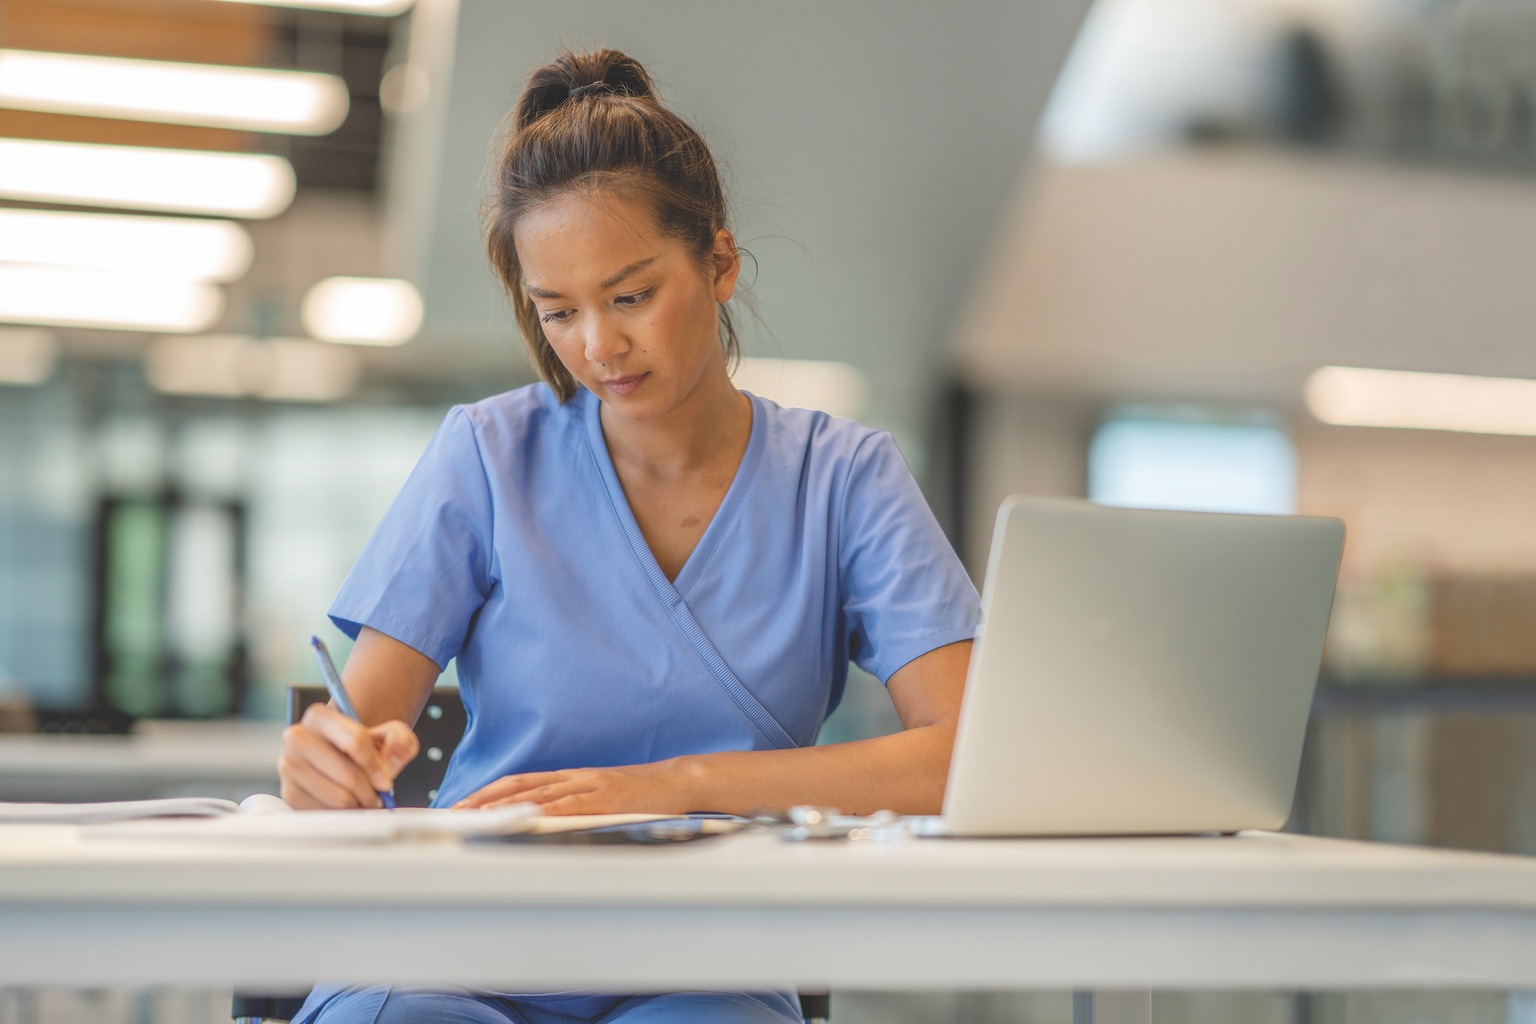 Nurse working at table with laptop